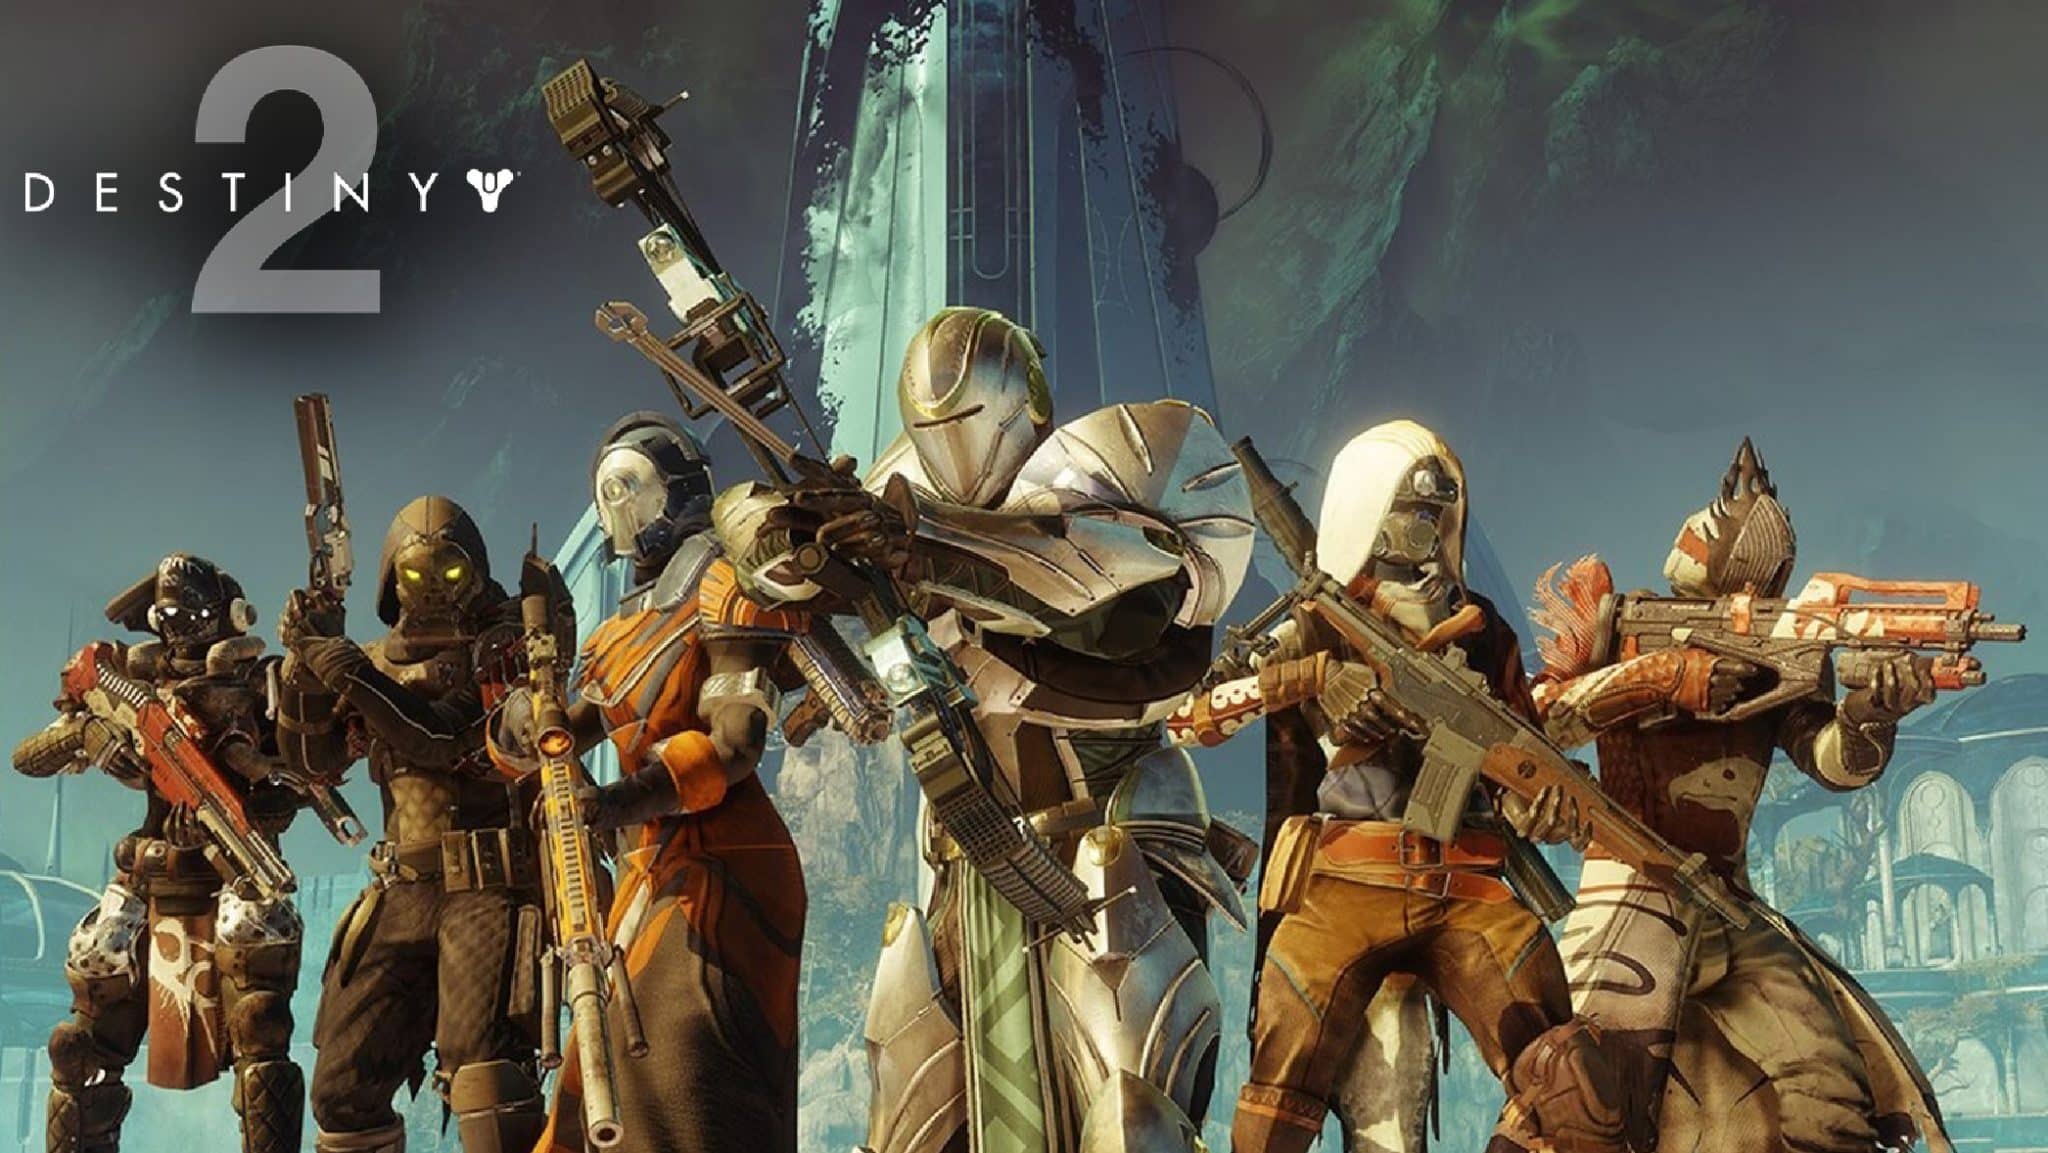 Destiny 2 Guardians with weapons drawn